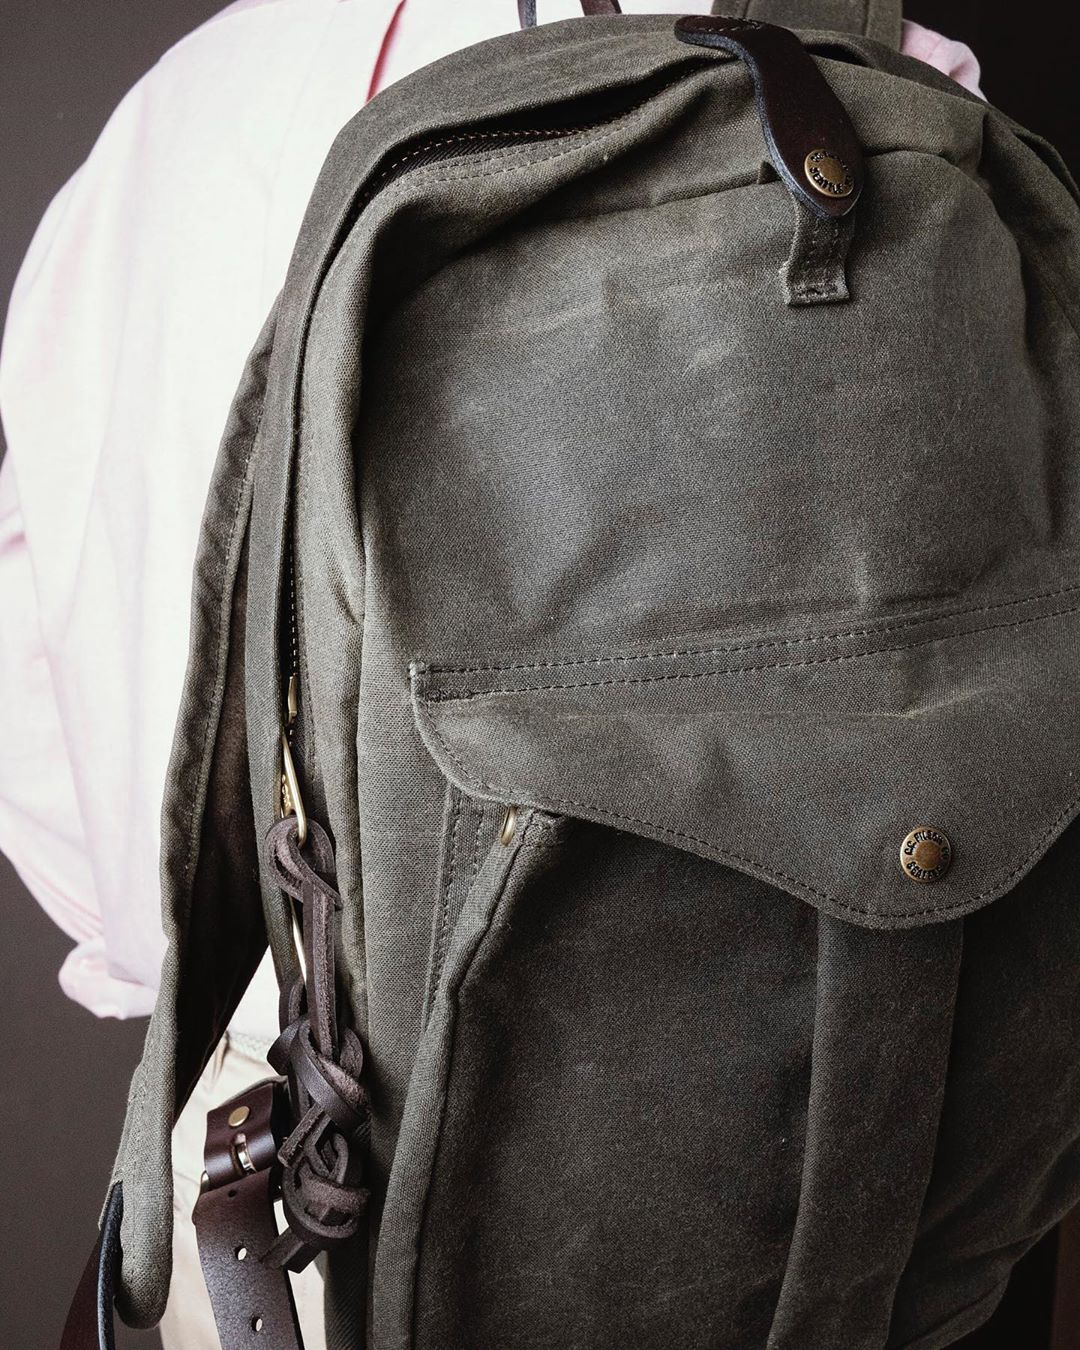 Journeyman Backpack - The Signet Store